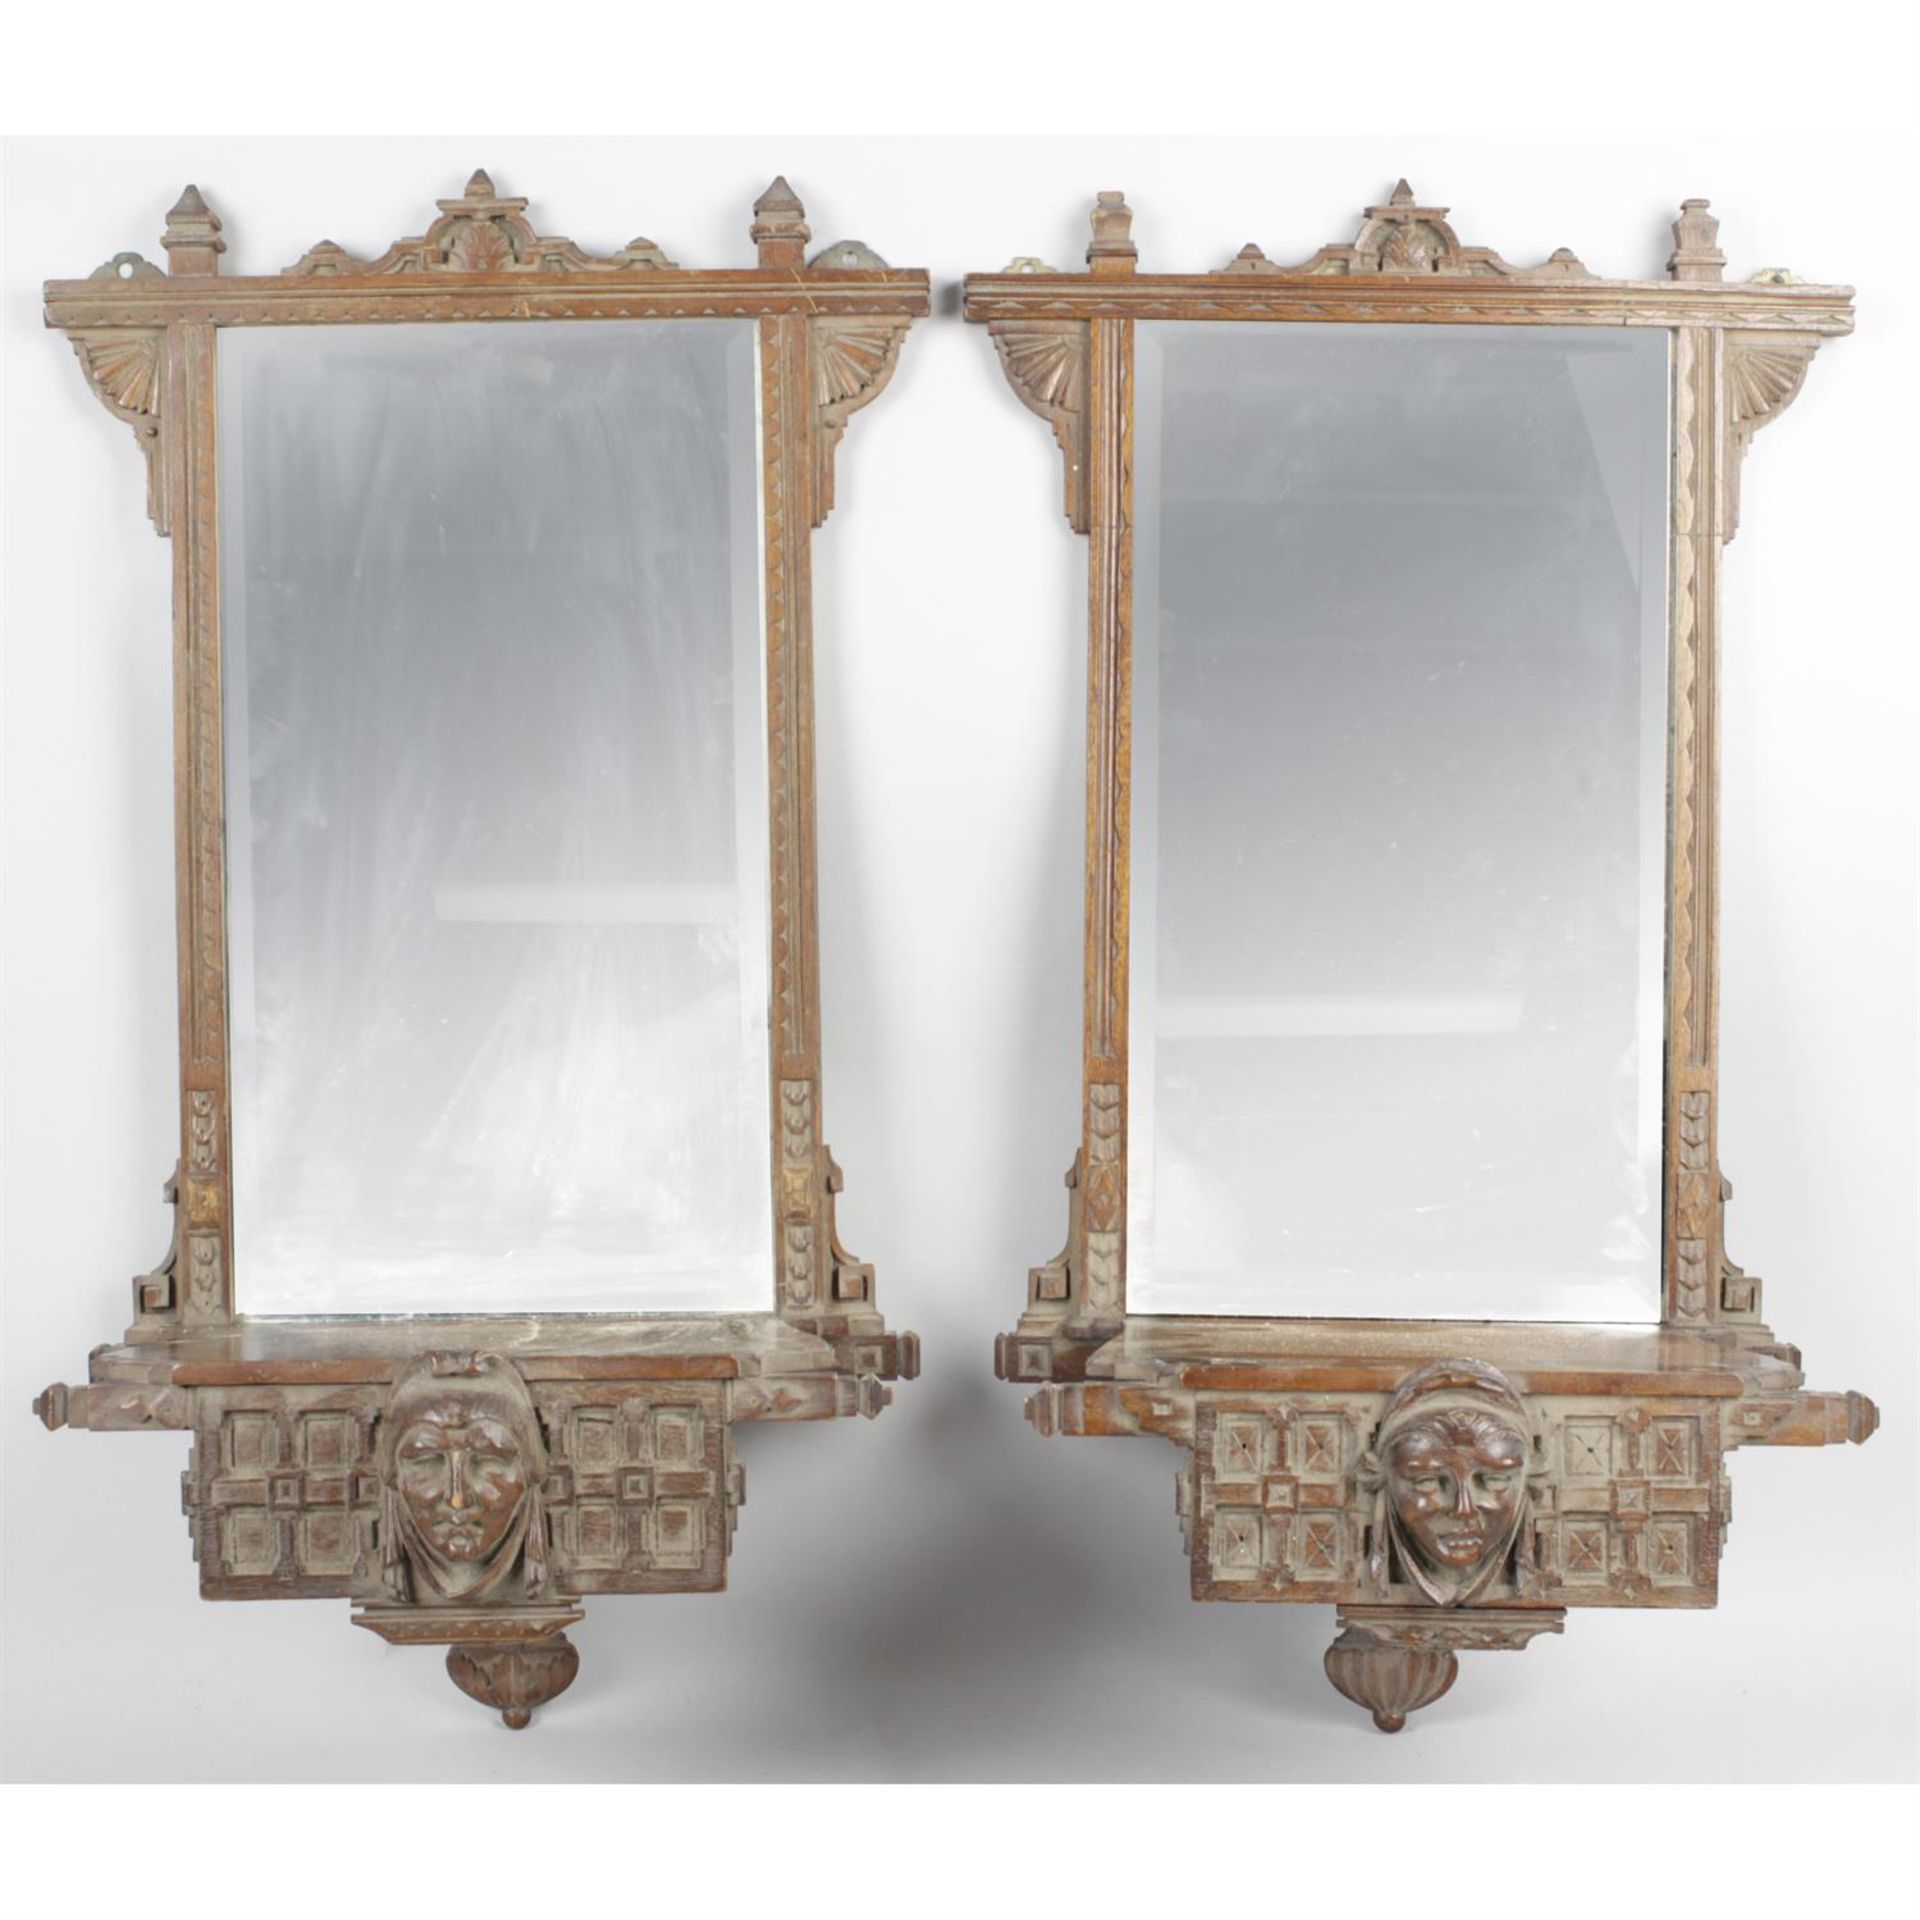 A pair of Arts & Crafts gothic design mahogany mirror backed wall brackets.